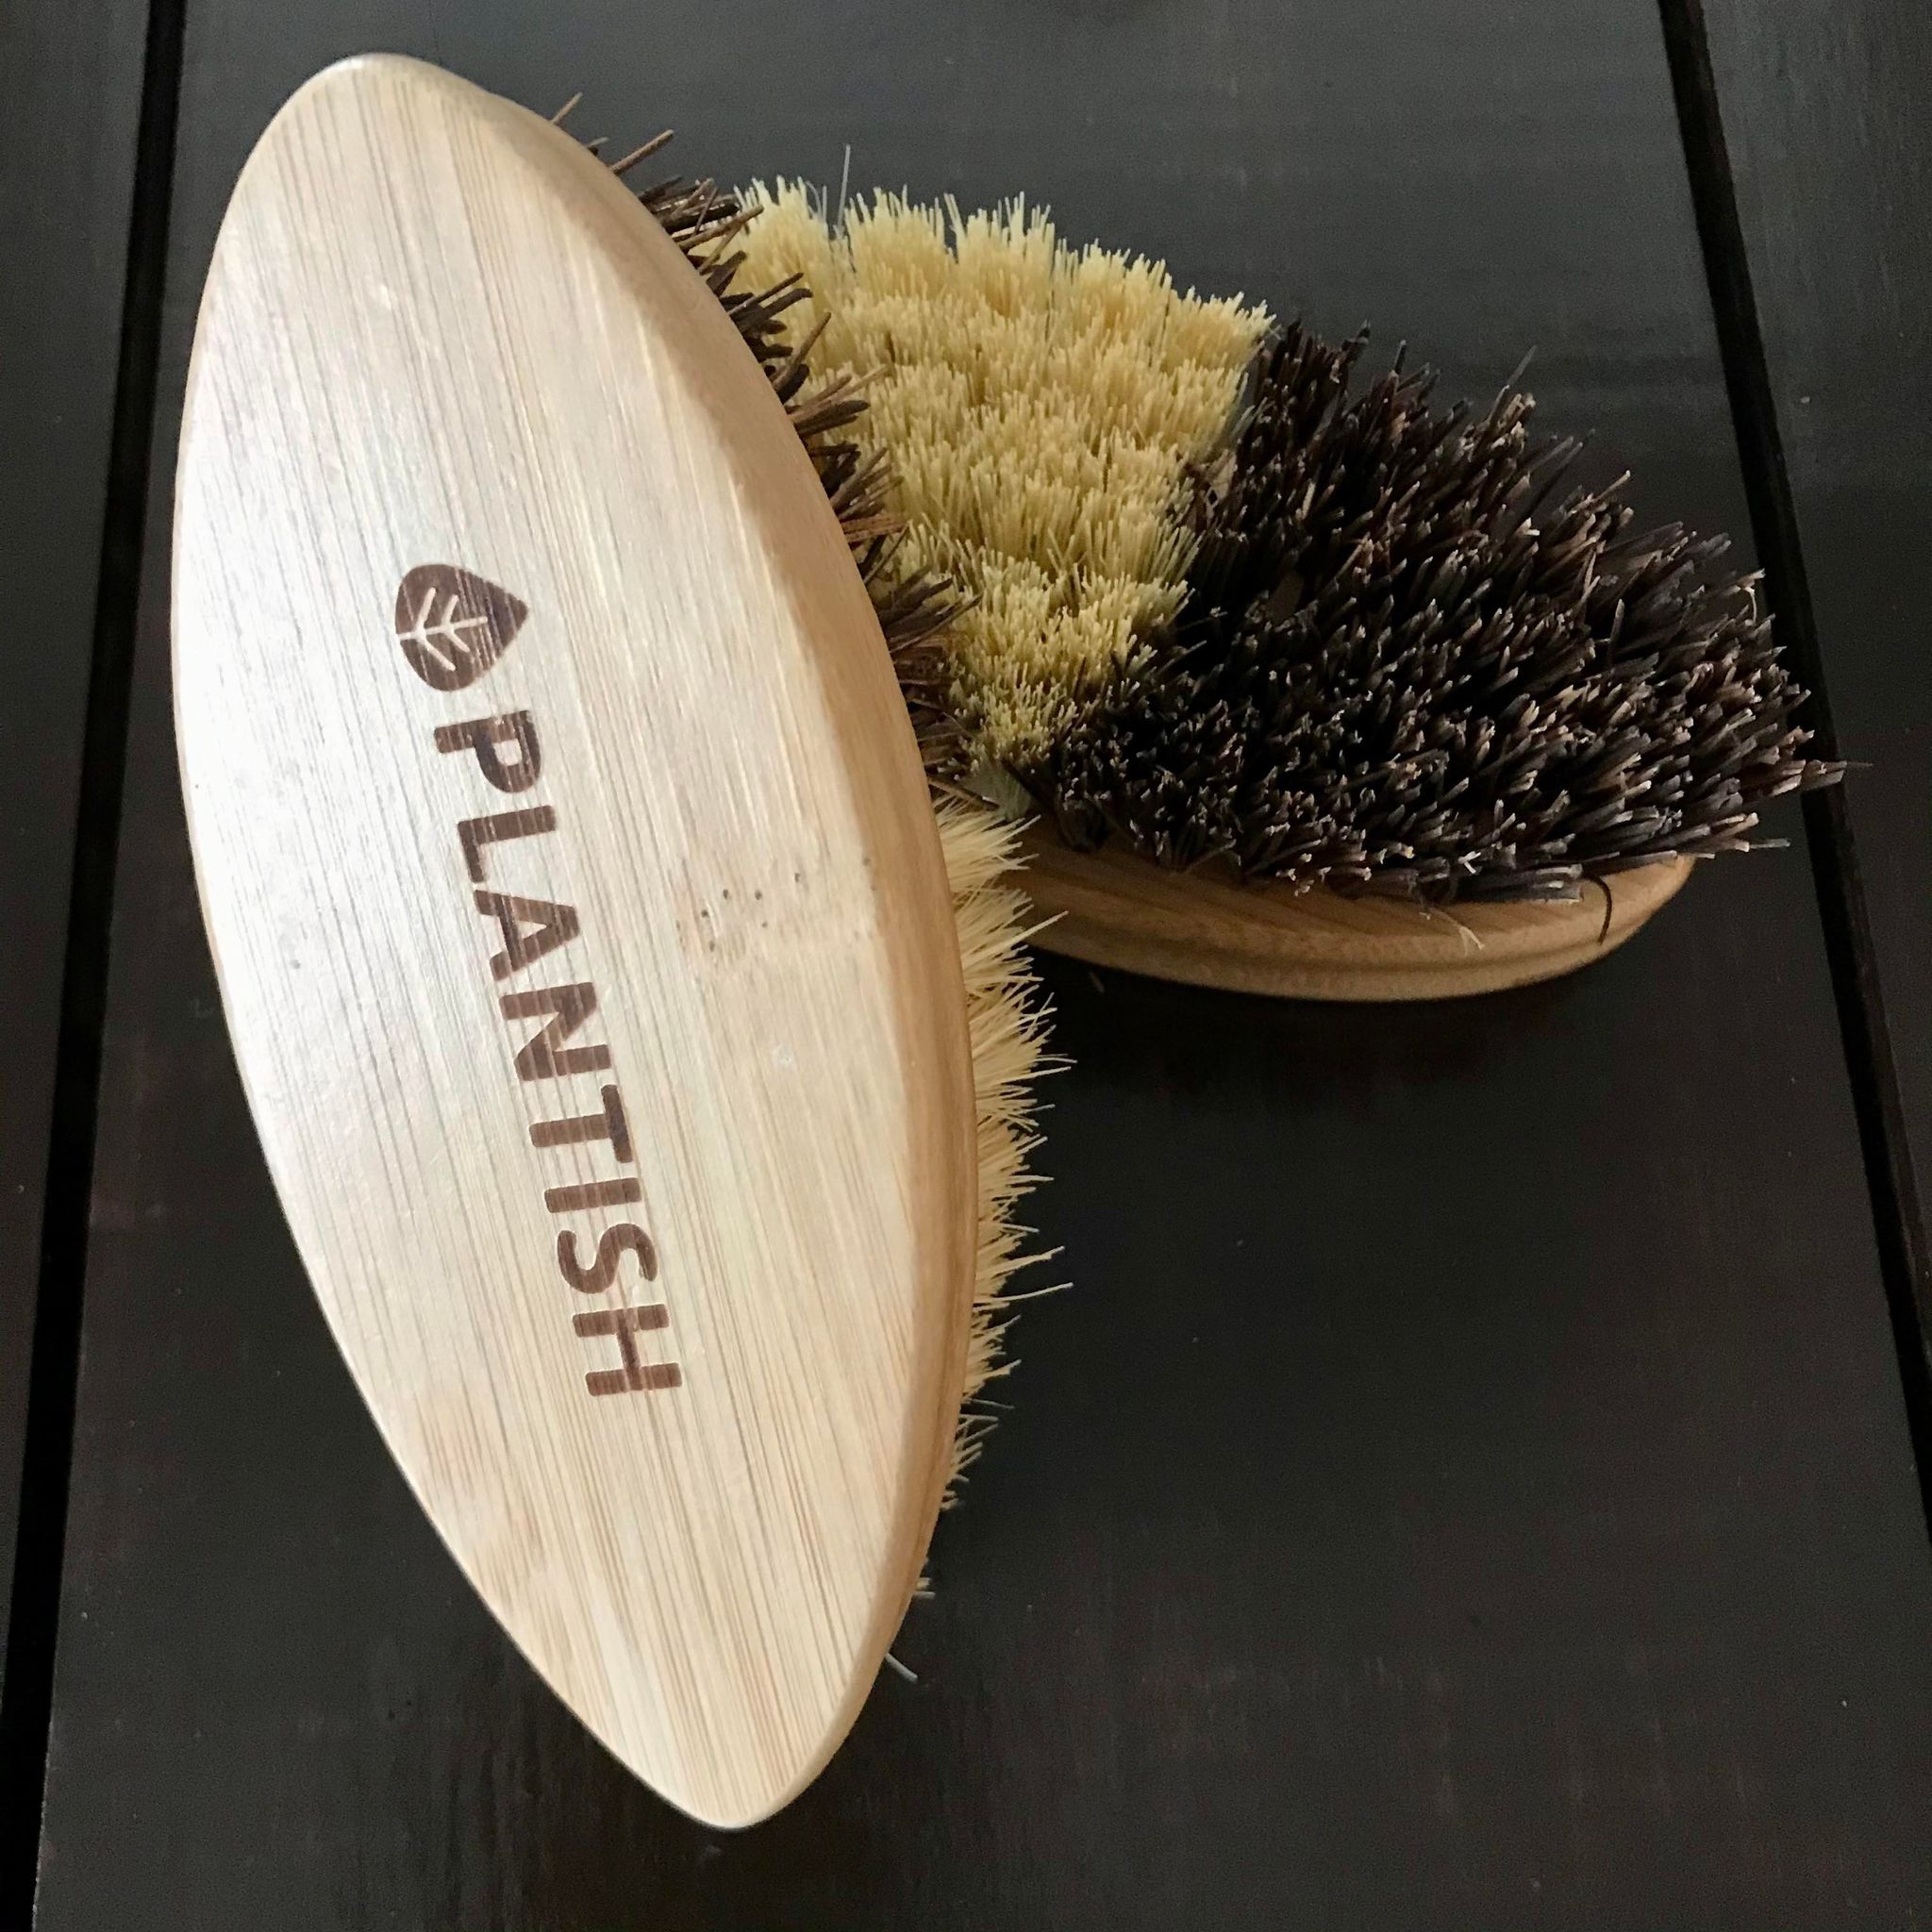 Multipurpose zero waste sisal and palm scrubber brush for cleaning vegetable, floors, tubs etc.